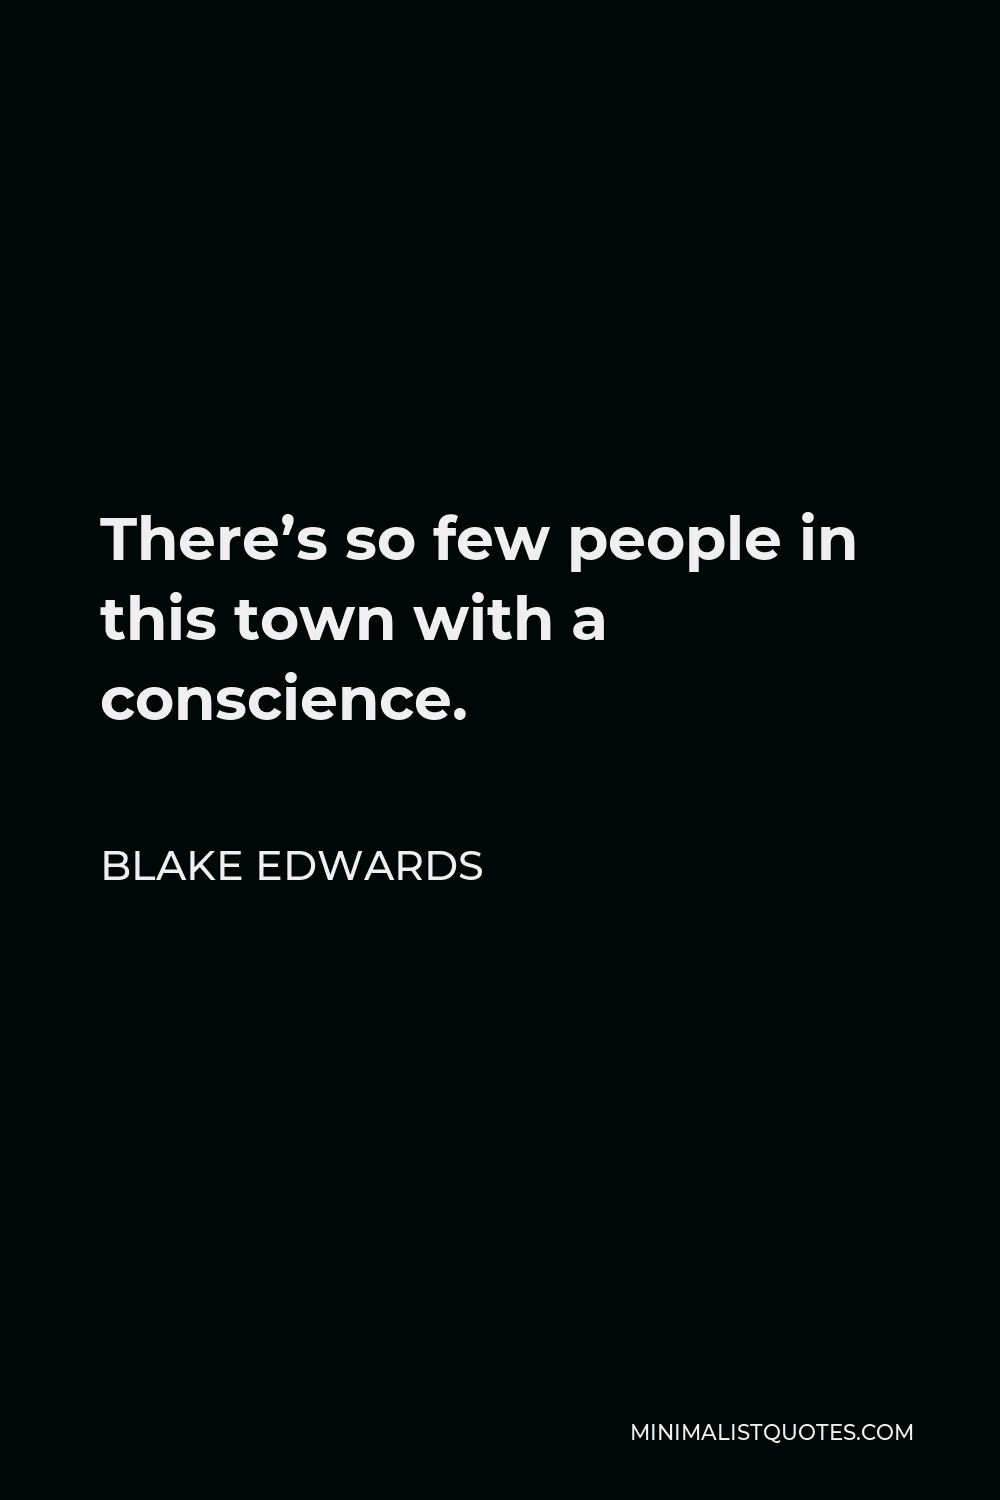 Blake Edwards Quote - There’s so few people in this town with a conscience.